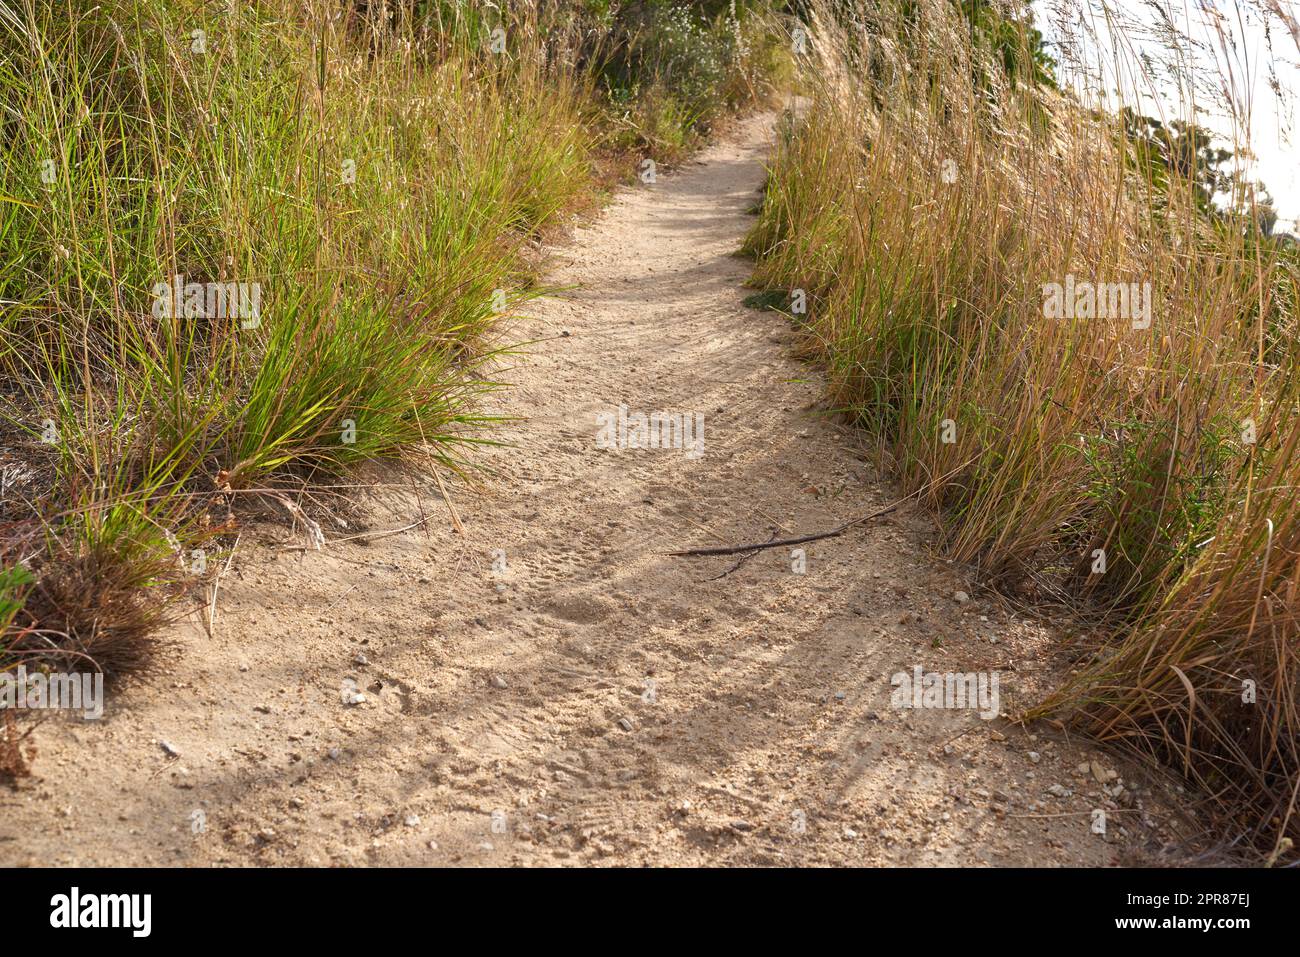 Scenic hiking trail through grassland along a mountain. Closeup of a rugged and sandy path in nature to explore during a walk in the fresh air outdoors. Remote and quiet landscape in the wilderness Stock Photo